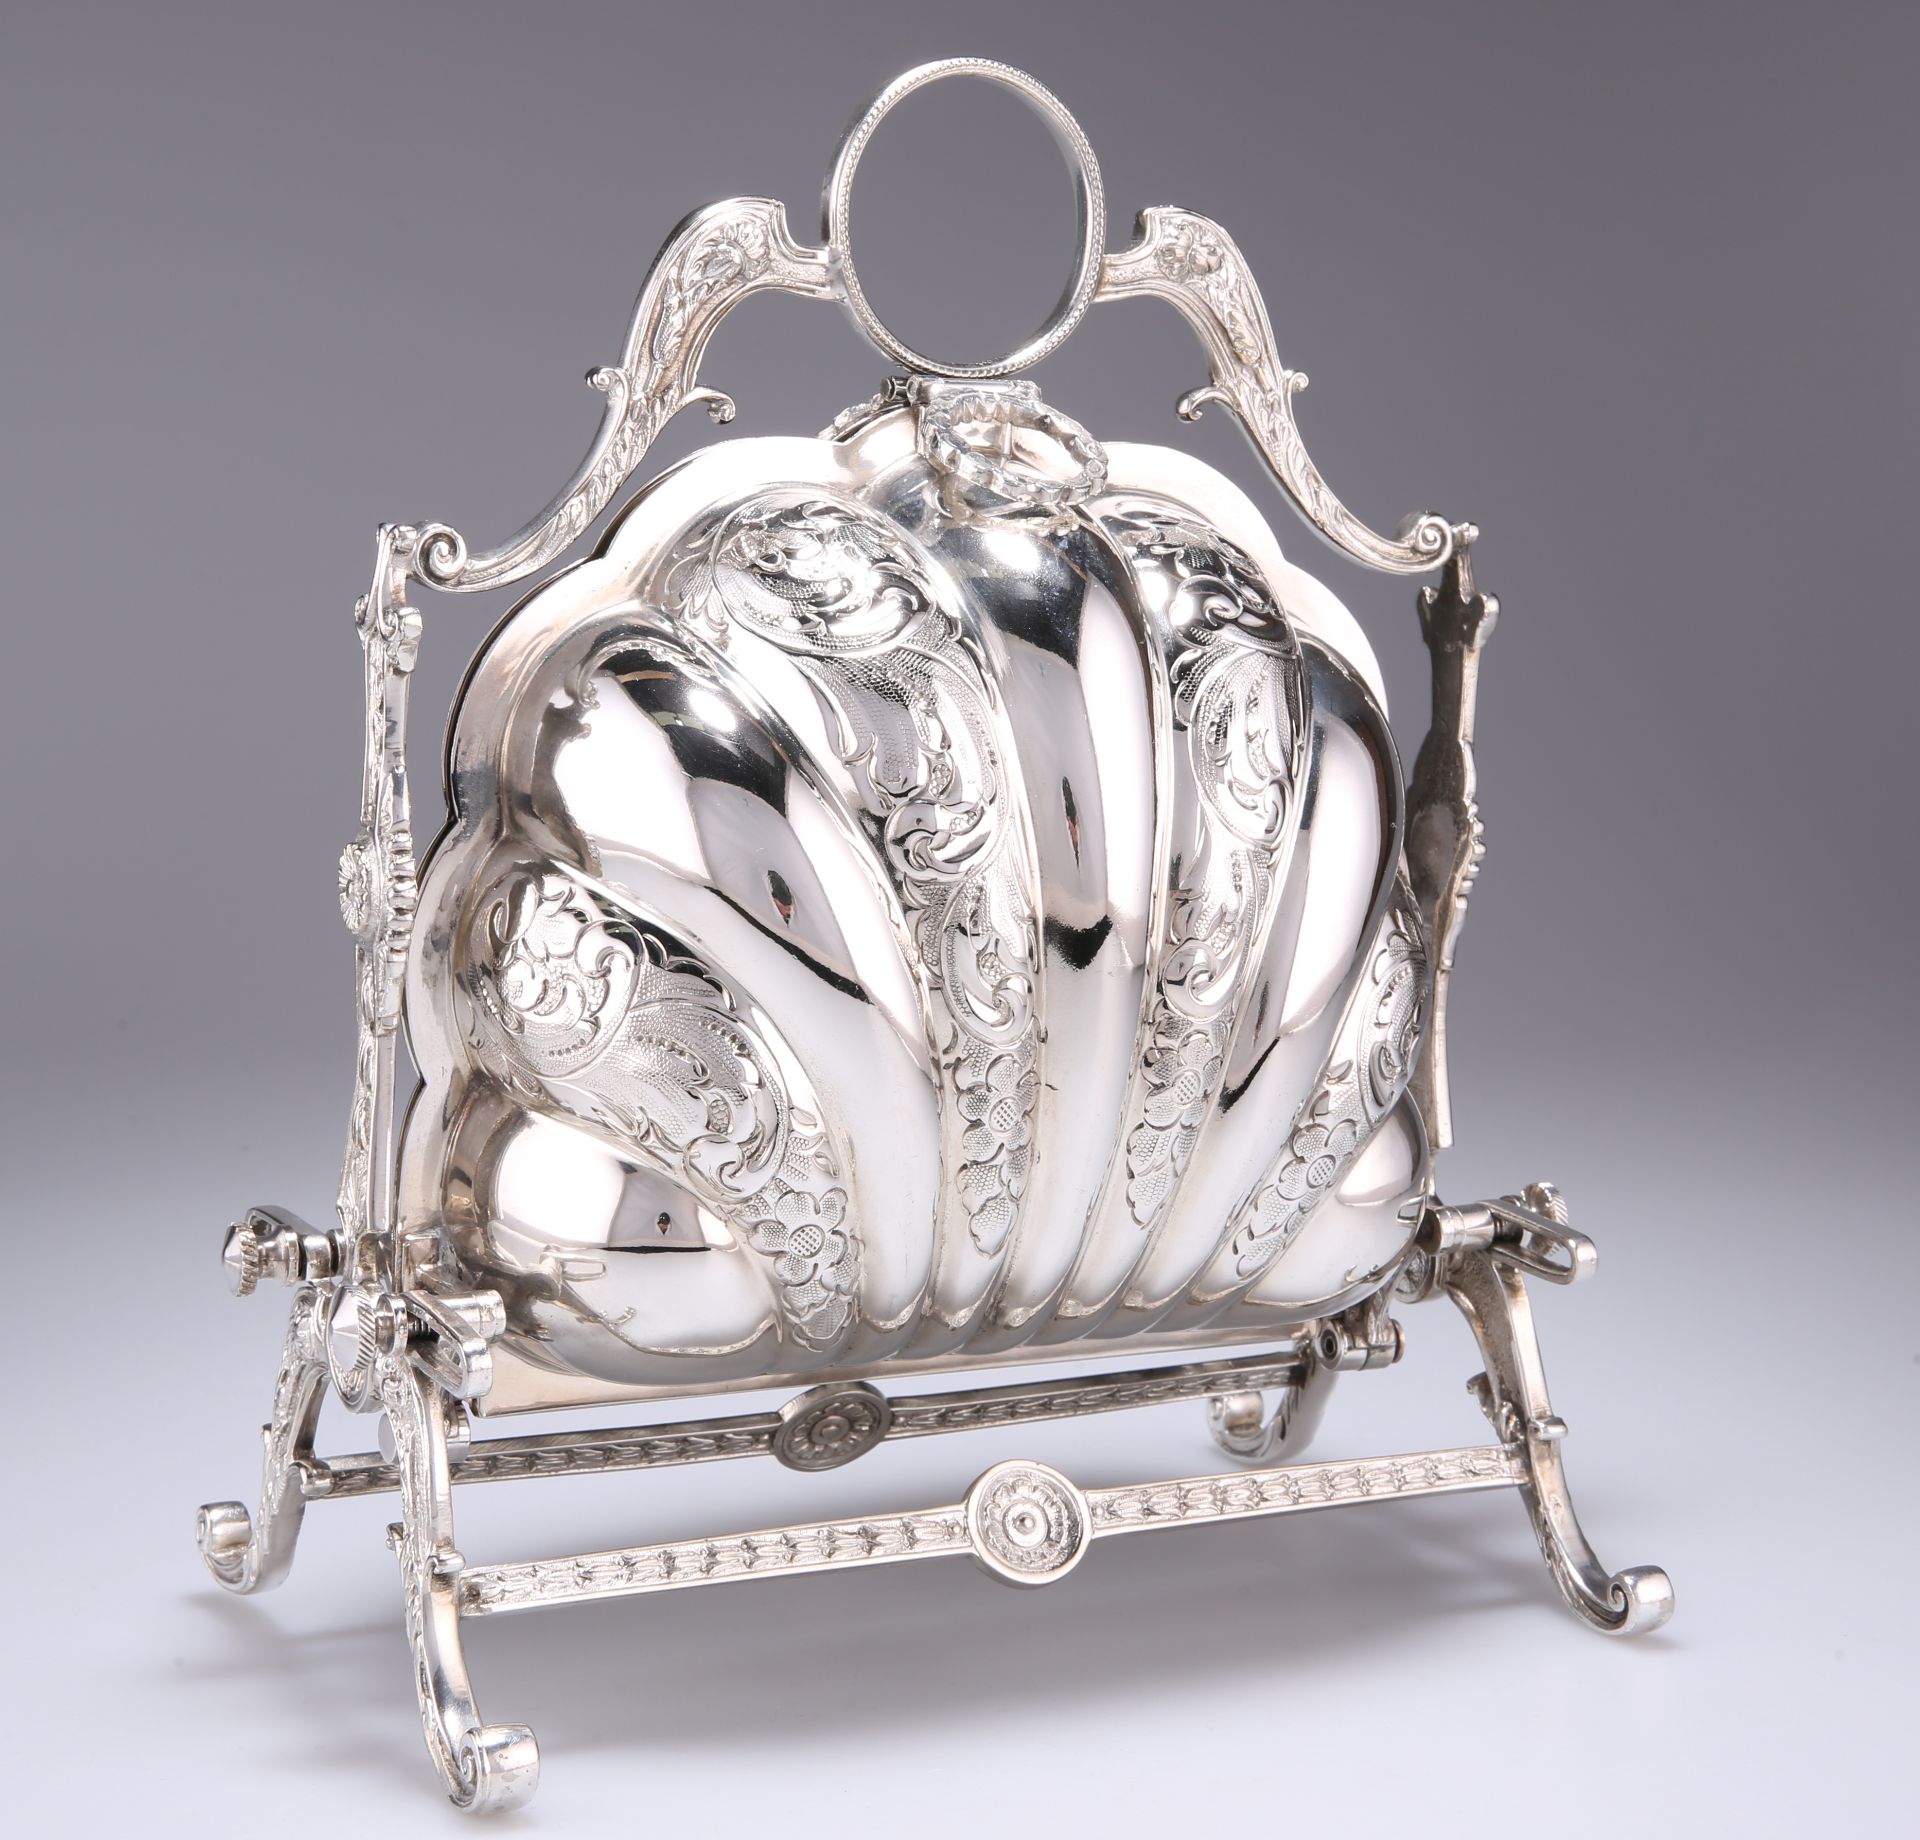 A VICTORIAN SILVER-PLATED MUFFIN DISH